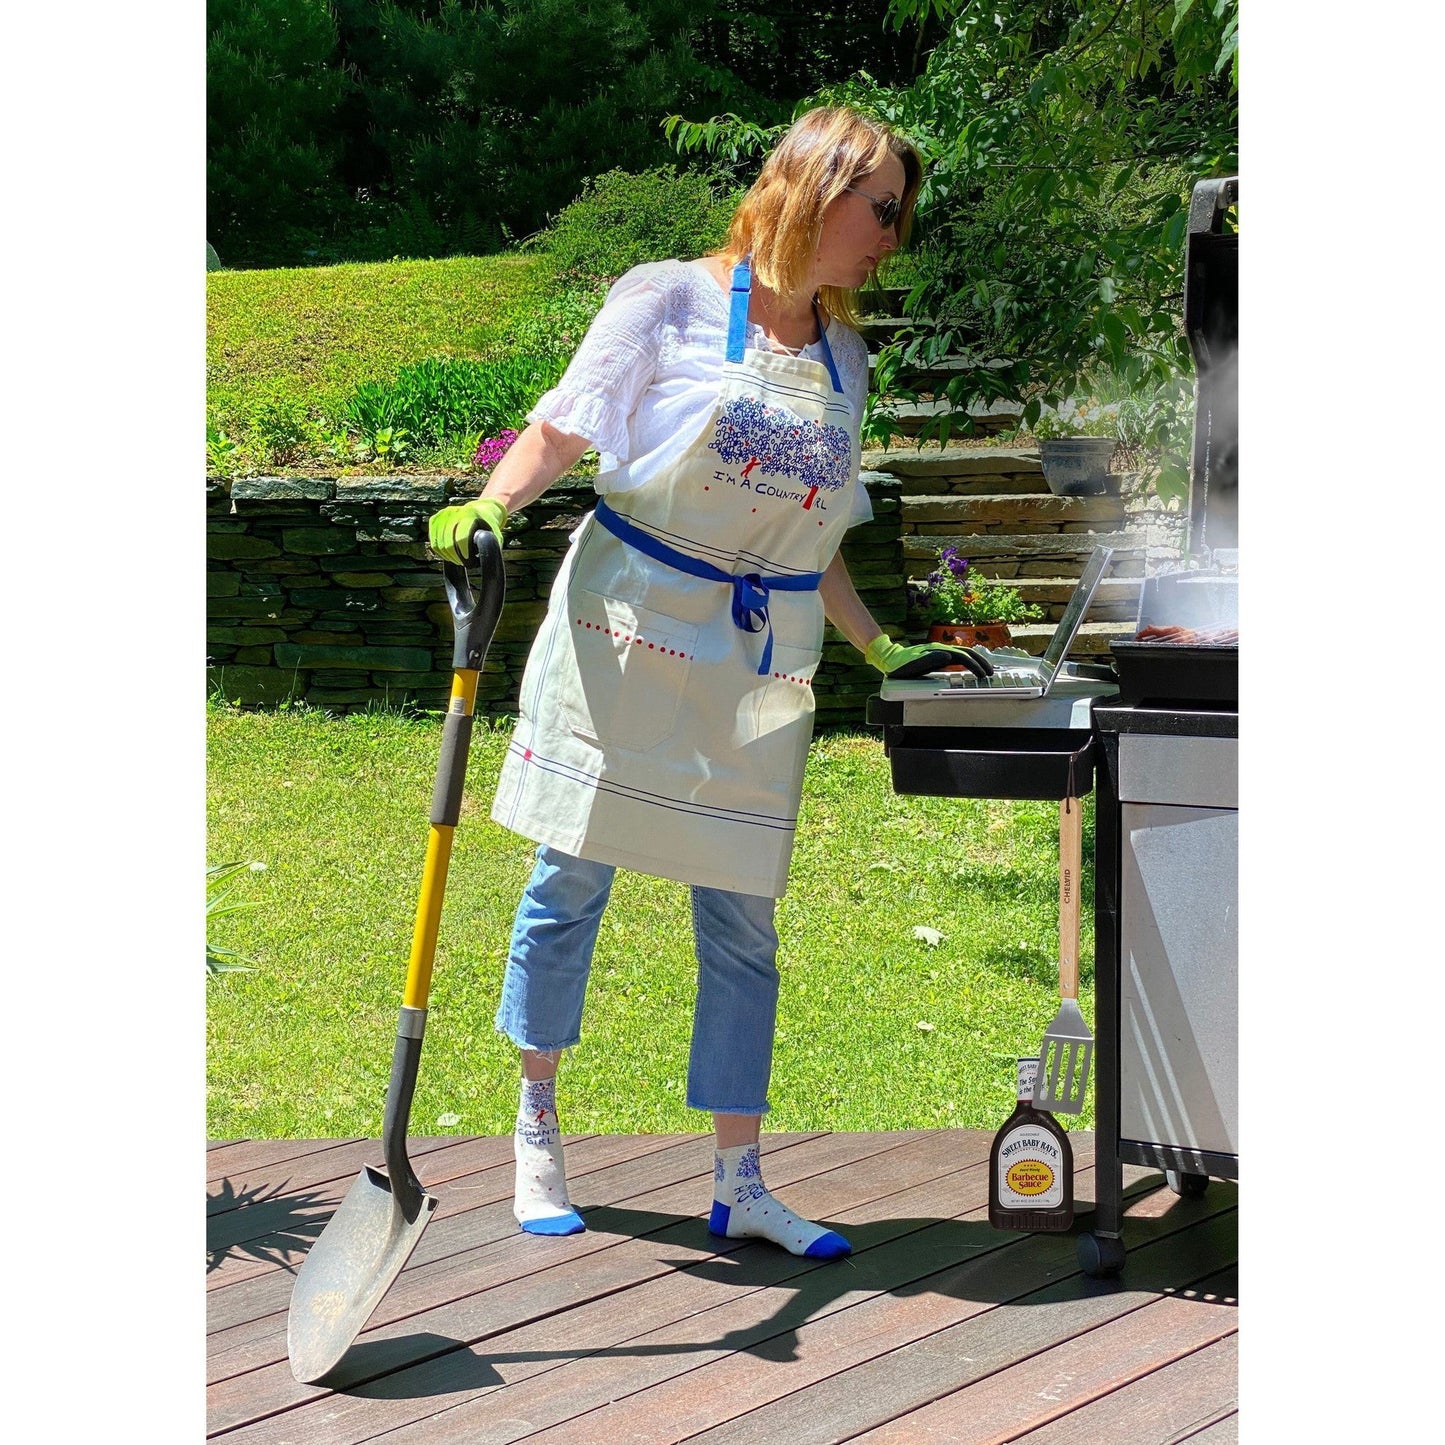 I'm A Country Girl Funny Cooking and BBQ Apron 2 Pockets Adjustable Strap 100% Cotton